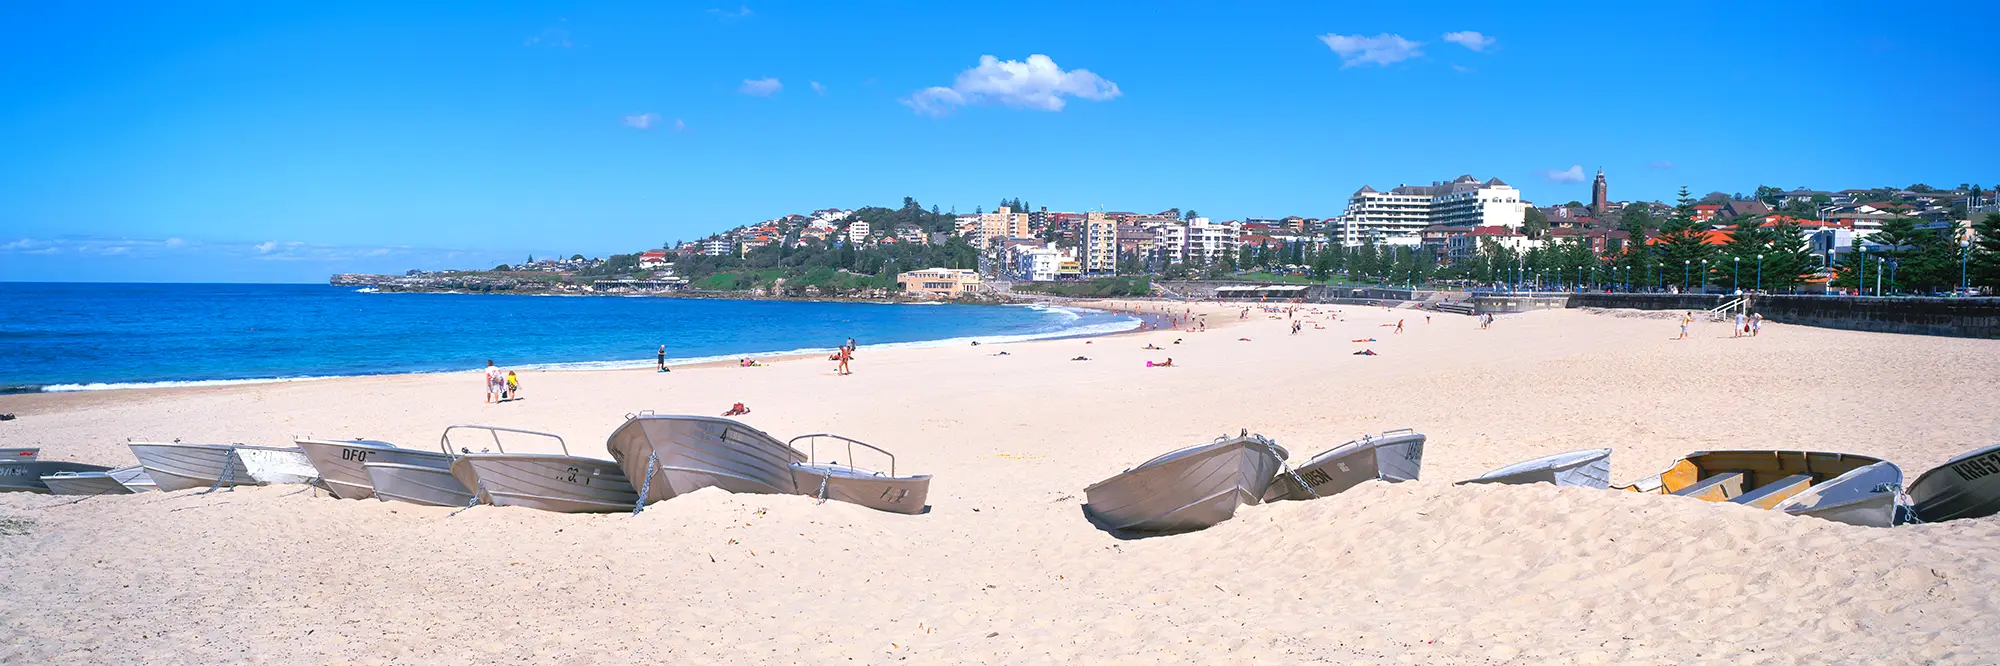 Coogee Beach Boats Panoramic Daytime Landscape Photo